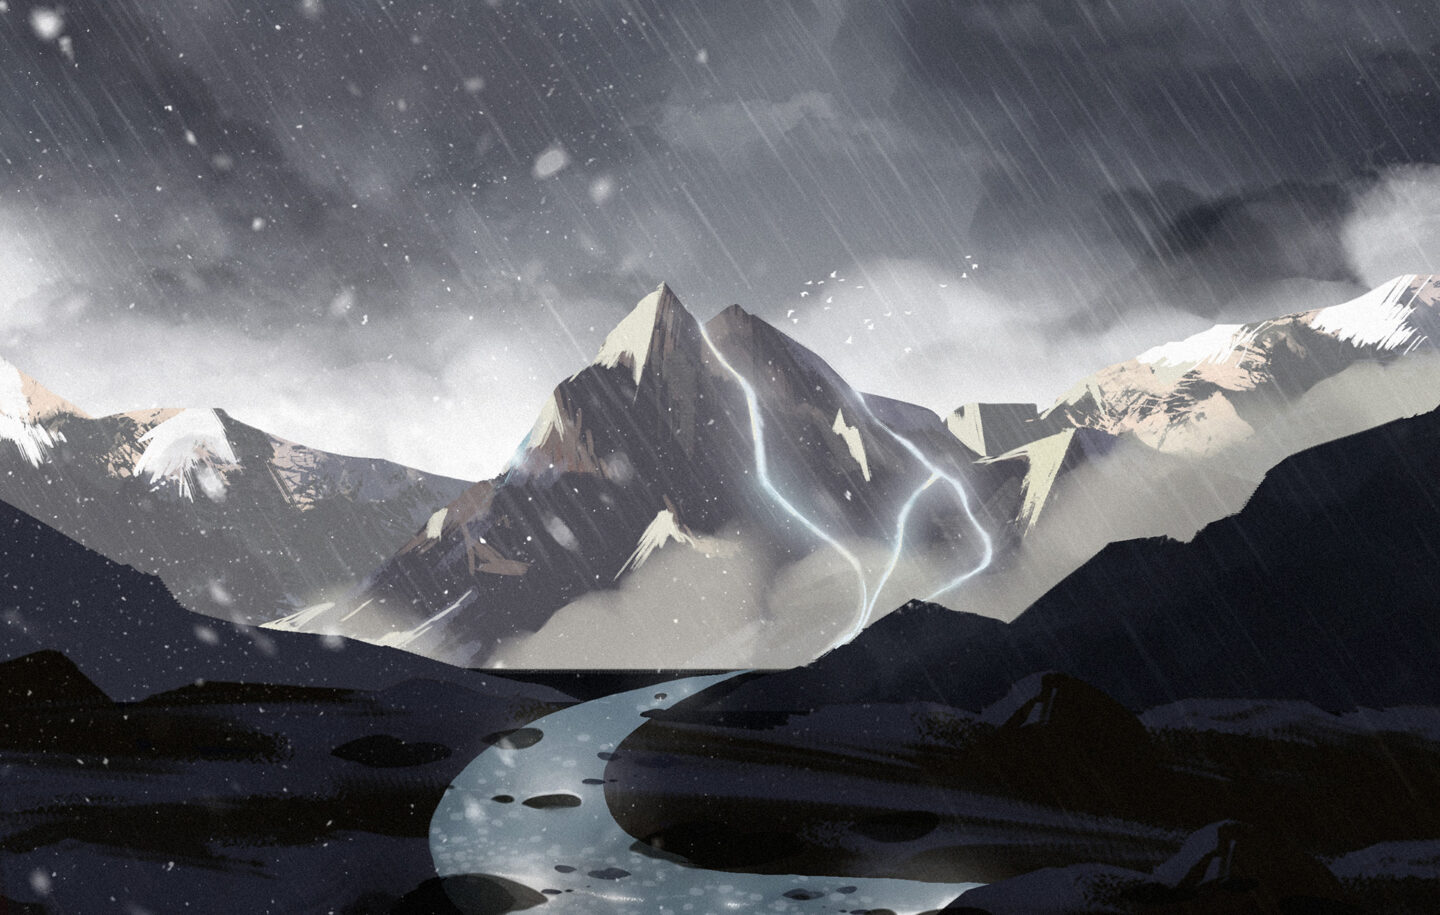 Ilustration of snowcapped mountains in the rain, with gray clouds above.